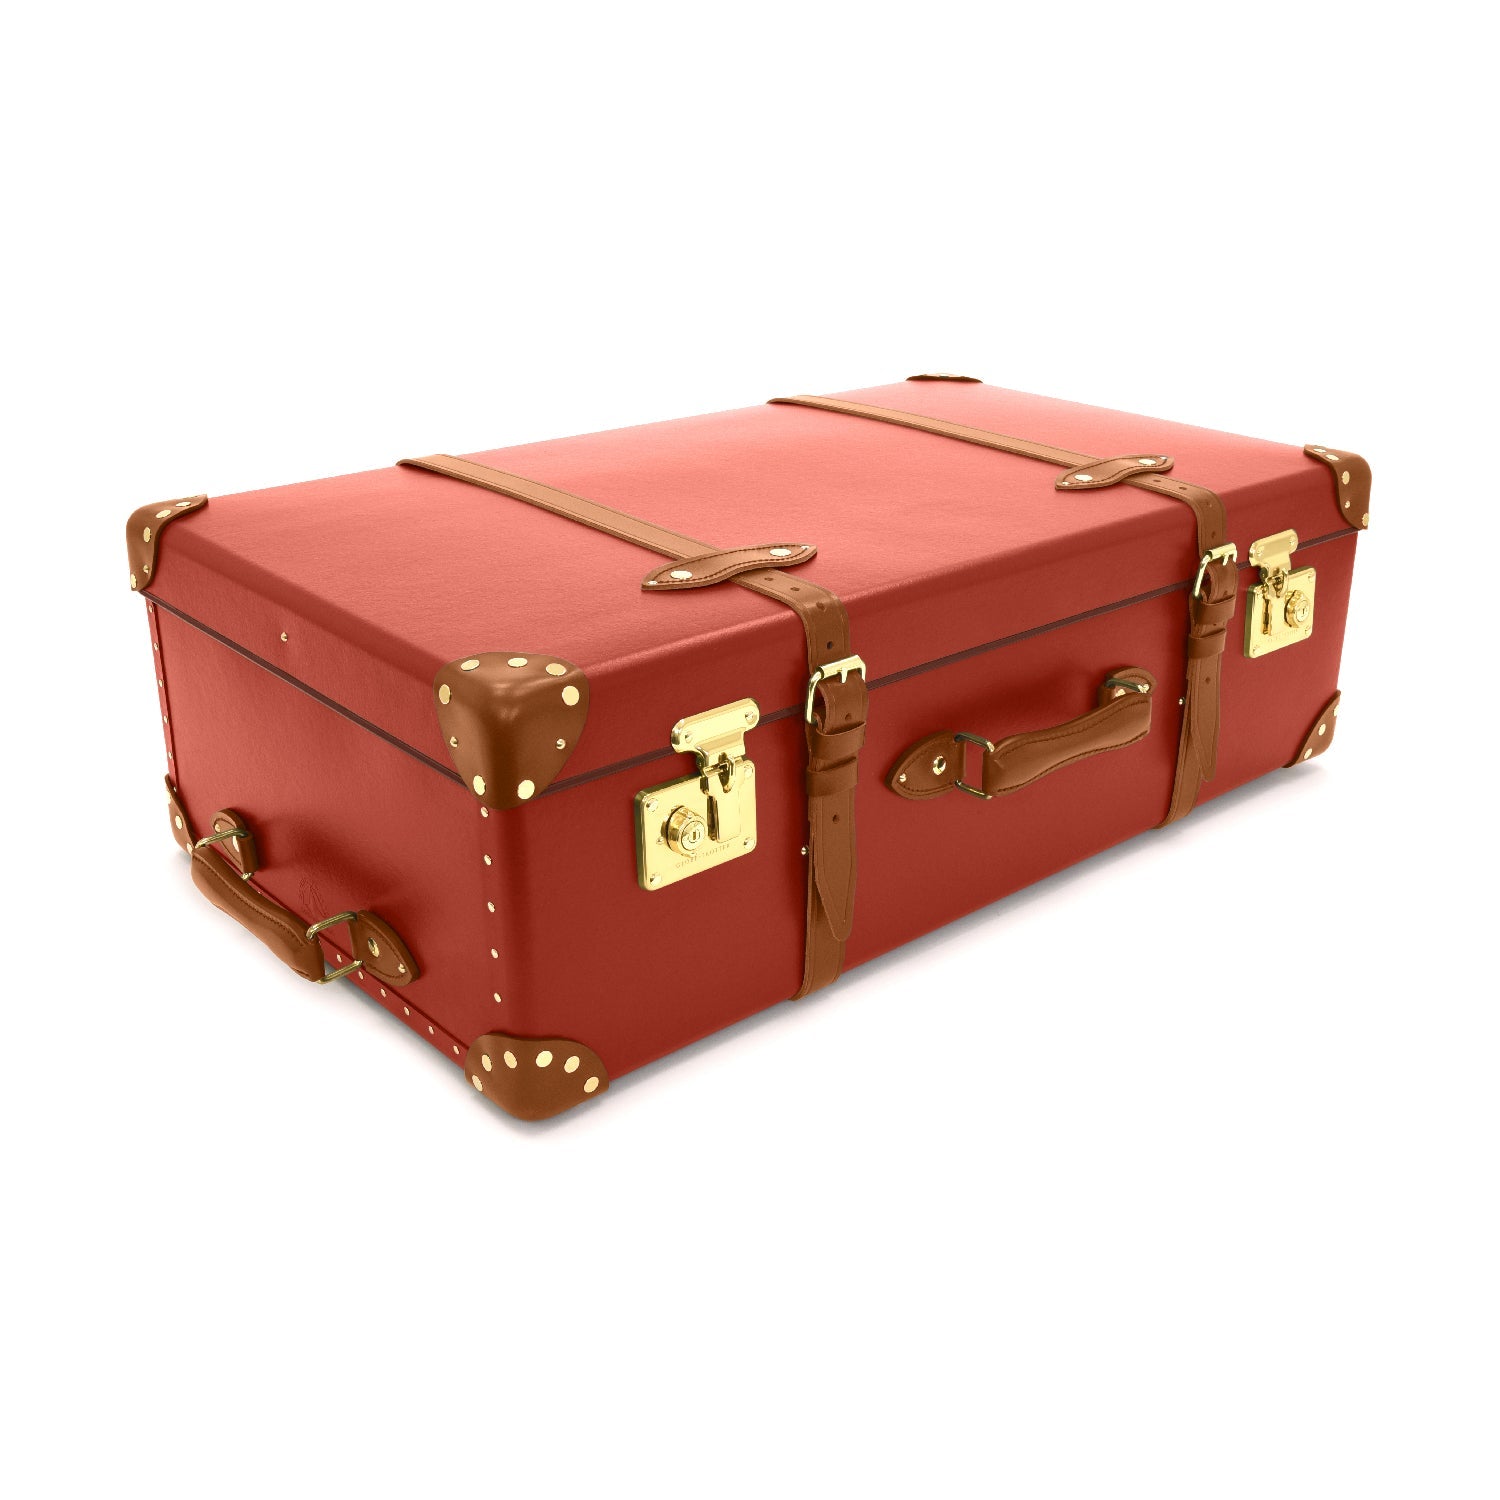 Centenary · XL Suitcase | Red/Caramel - GLOBE-TROTTER